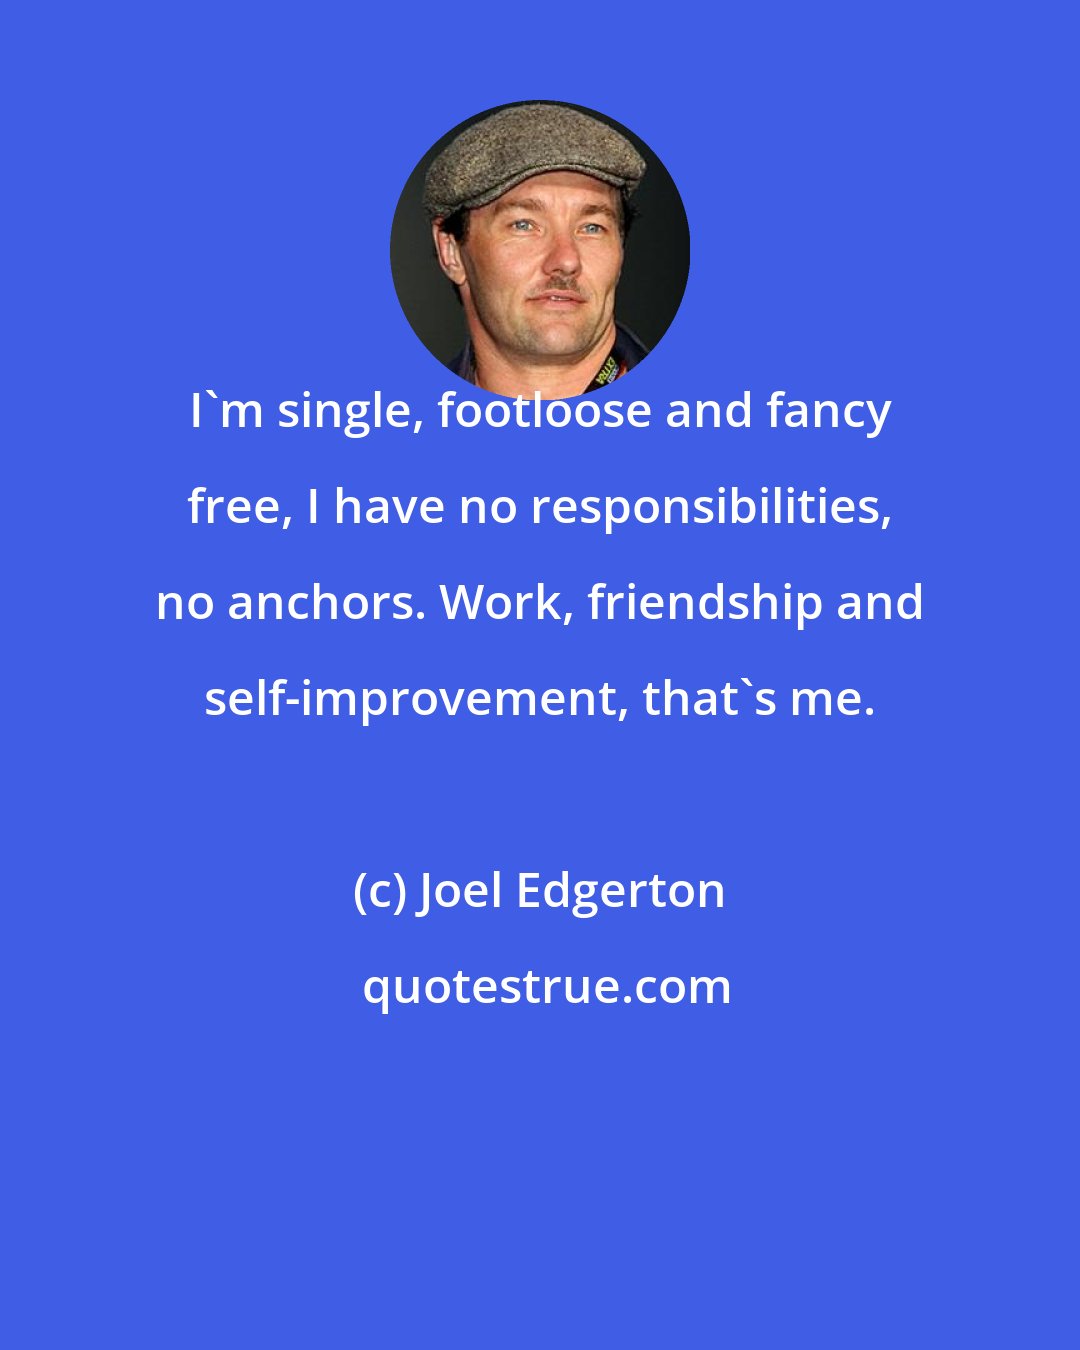 Joel Edgerton: I'm single, footloose and fancy free, I have no responsibilities, no anchors. Work, friendship and self-improvement, that's me.